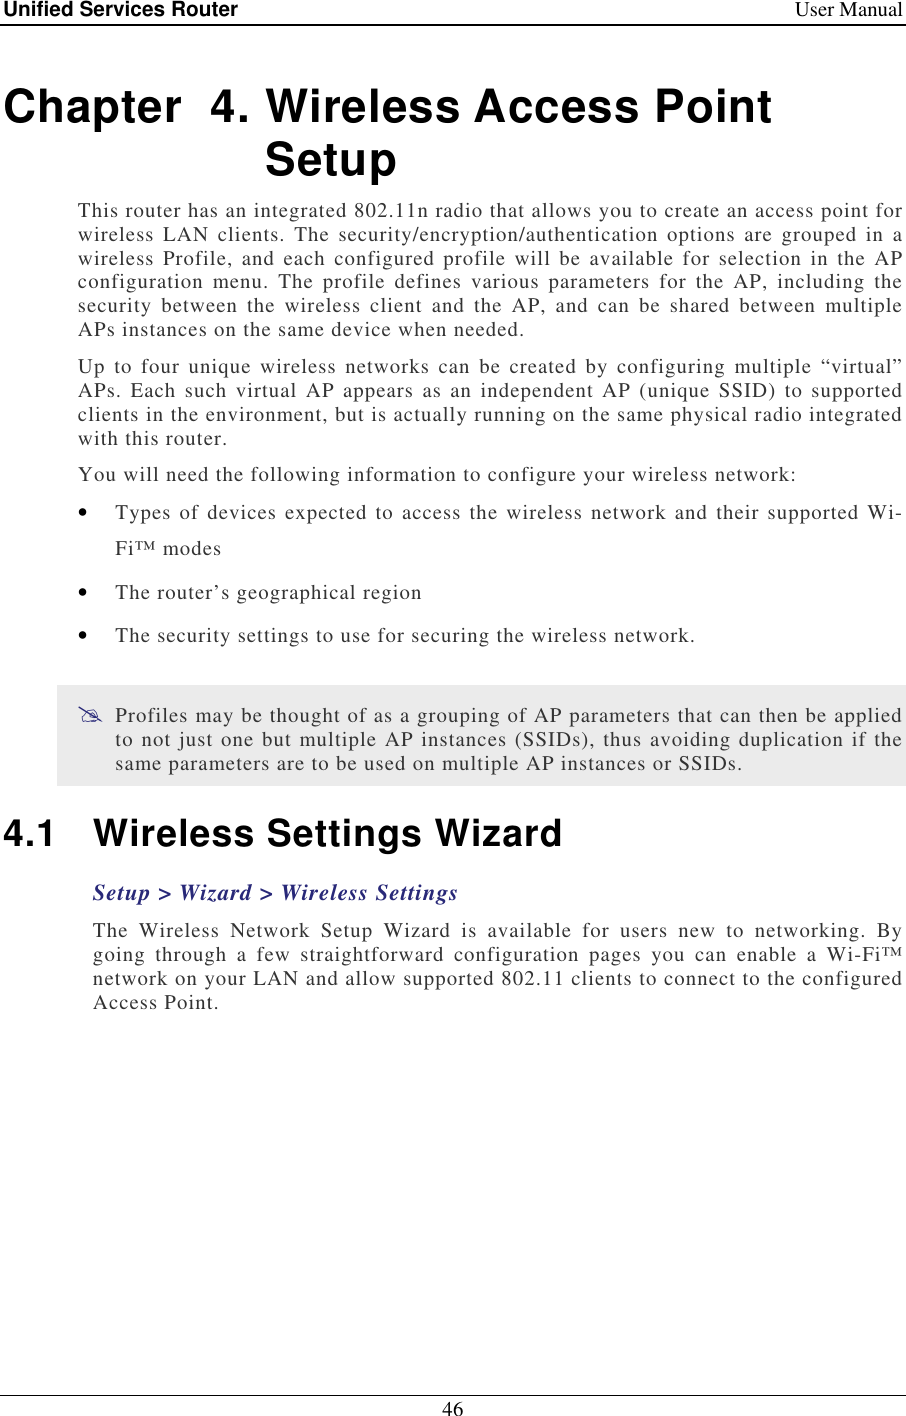 Unified Services Router    User Manual 46  Chapter  4. Wireless Access Point Setup This router has an integrated 802.11n radio that allows you to create an access point for wireless  LAN  clients.  The  security/encryption/authentication  options  are  grouped  in  a wireless  Profile,  and  each configured  profile  will  be  available  for  selection  in  the  AP configuration  menu.  The  profile  defines  various  parameters  for  the  AP,  including  the security  between  the  wireless  client  and  the  AP,  and  can  be  shared  between  multiple APs instances on the same device when needed.  Up  to  four  unique  wireless  networks  can  be  created  by  configuring  multiple  “virtual” APs.  Each  such  virtual  AP  appears  as  an  independent  AP  (unique  SSID)  to  supported clients in the environment, but is actually running on the same physical radio integrated with this router. You will need the following information to configure your wireless network:  • Types  of  devices expected  to  access  the wireless  network and  their supported Wi-Fi™ modes  • The router’s geographical region  • The security settings to use for securing the wireless network.   Profiles may be thought of as a grouping of AP parameters that can then be applied to not just one but multiple AP instances (SSIDs), thus avoiding duplication if the same parameters are to be used on multiple AP instances or SSIDs. 4.1  Wireless Settings Wizard Setup &gt; Wizard &gt; Wireless Settings The  Wireless  Network  Setup  Wizard  is  available  for  users  new  to  networking.  By going  through  a  few  straightforward  configuration  pages  you  can  enable  a  Wi-Fi™ network on your LAN and allow supported 802.11 clients to connect to the configured Access Point. 